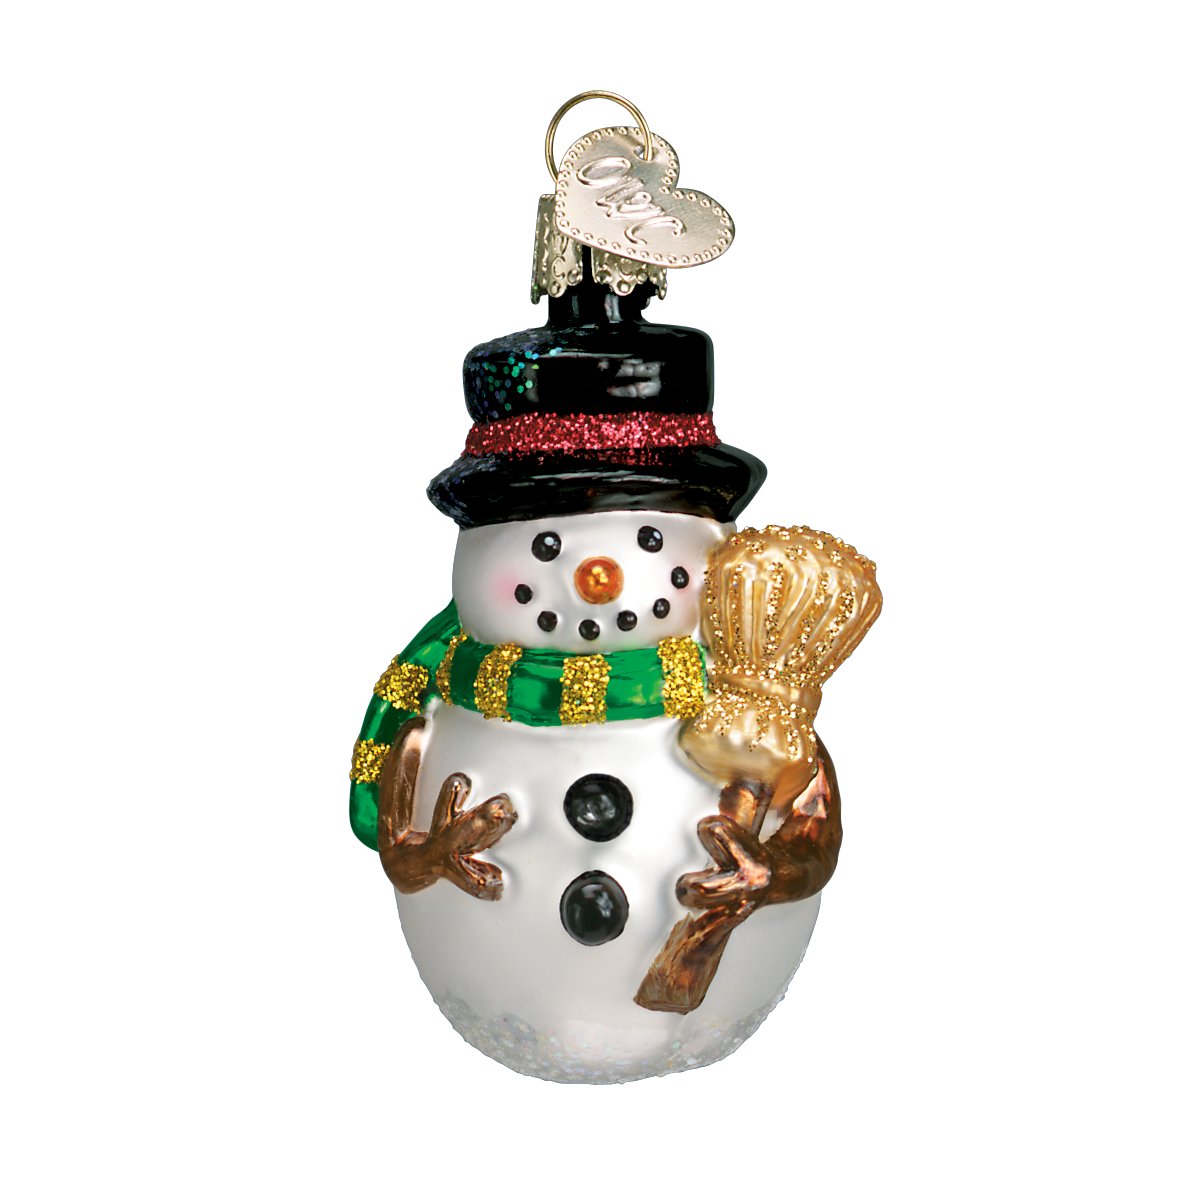 Miniature Mr. Snowman-A-Blown Glass Christmas Ornament by Old World Christmas